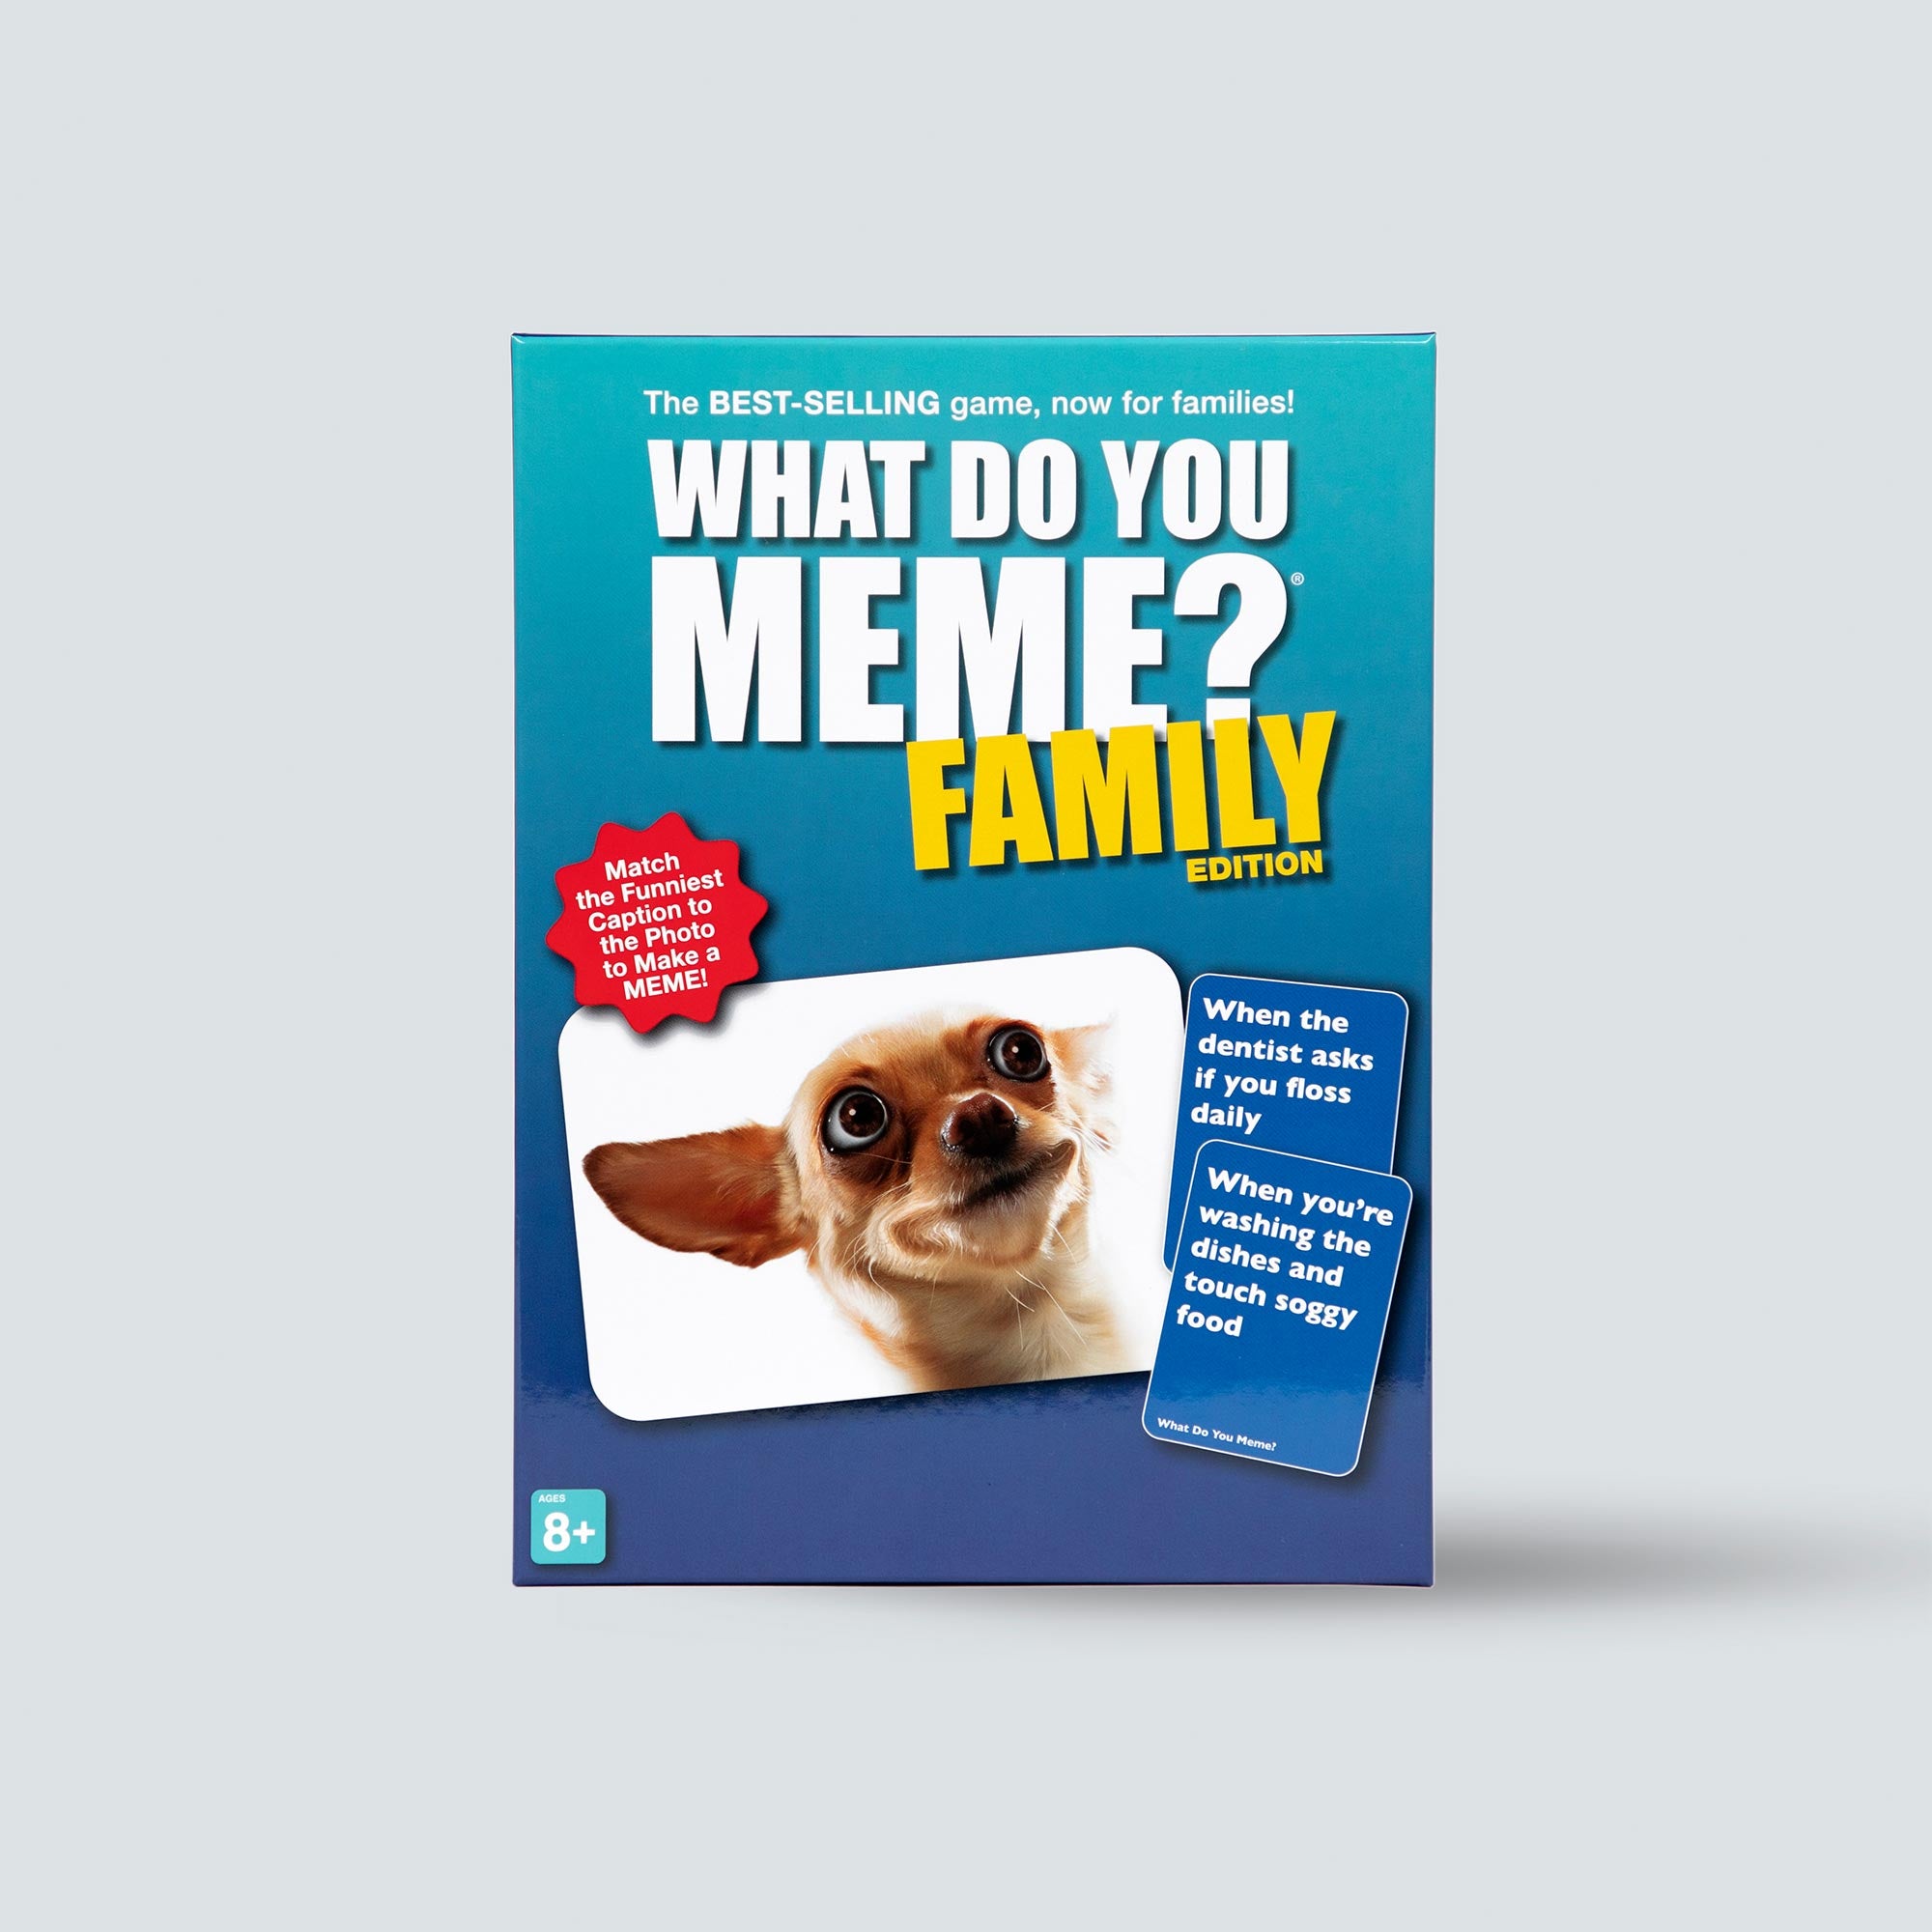 what-do-you-meme-family-edition-game-box-and-game-play-04-what-do-you-meme-by-relatable